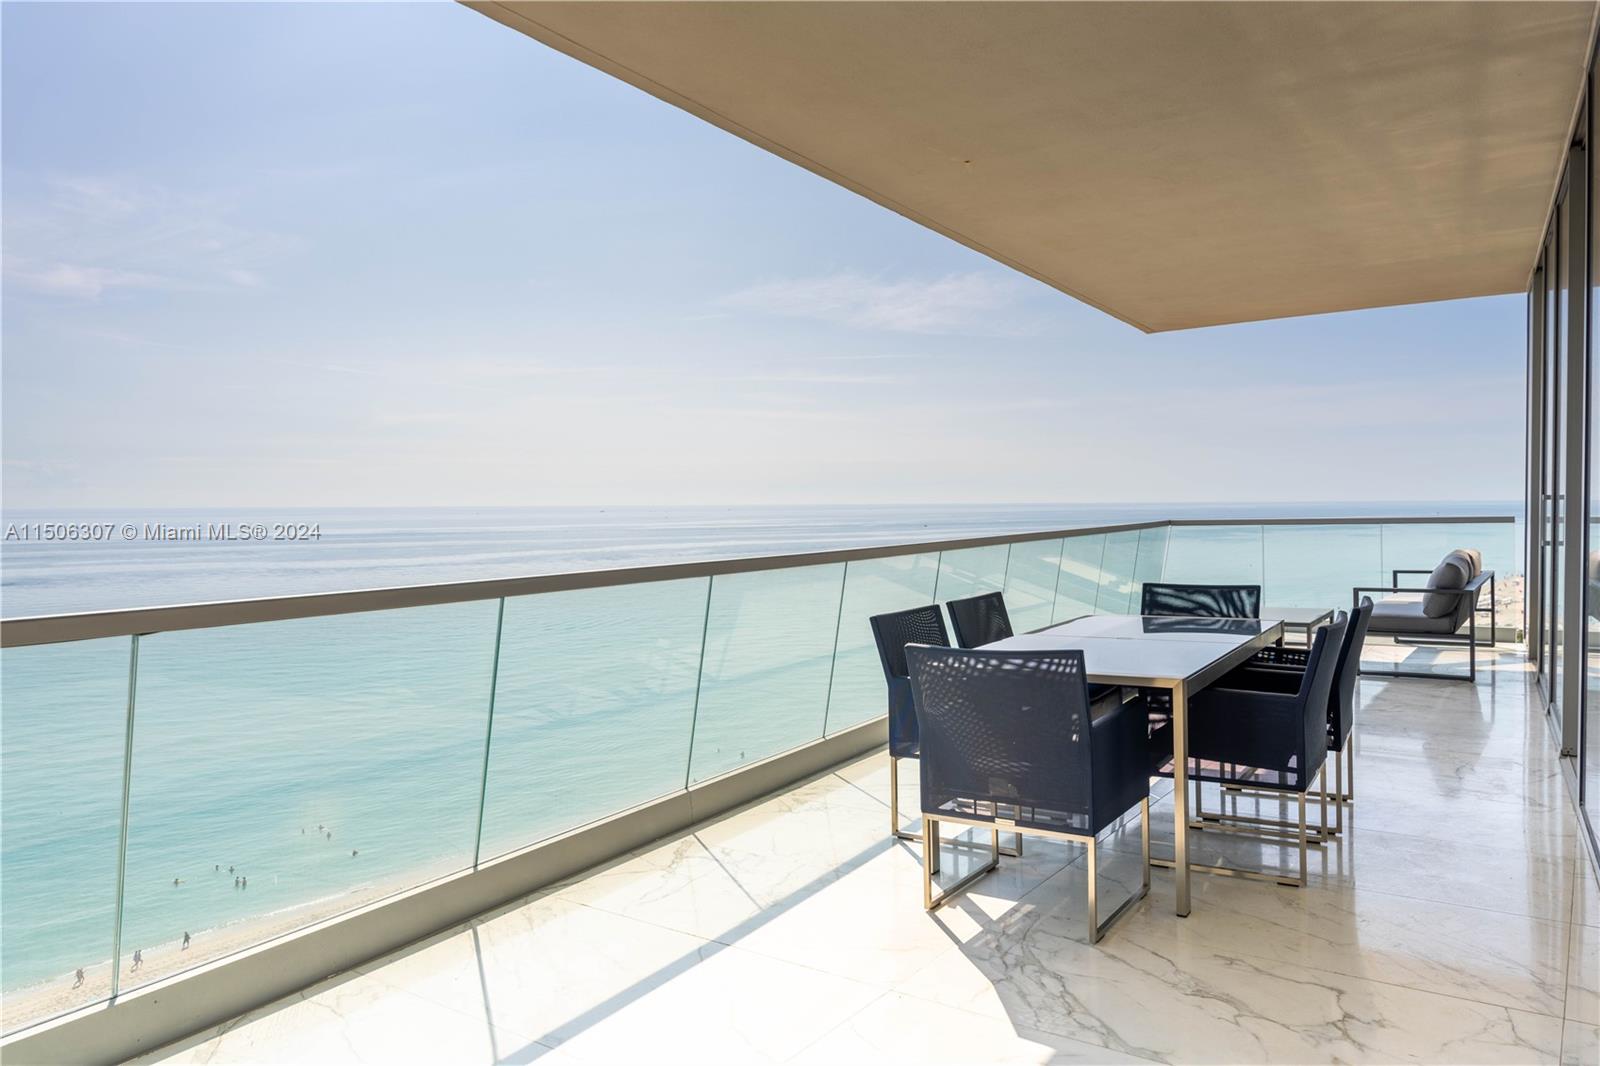 Be the fist to live and enjoy this magnificent 4 bedroom + Den, 5.5 baths at Turnberry Ocean Club. This residence has a flow through corner unit with direct ocean and intercostal views. Top of the line appliances and finishes. Building has six floor amenities, beach service, three swimming pools, private dining, state of the art fitness center and entertainment. 
UNIT IS LEASE FOR $35,000K MONTHLY.